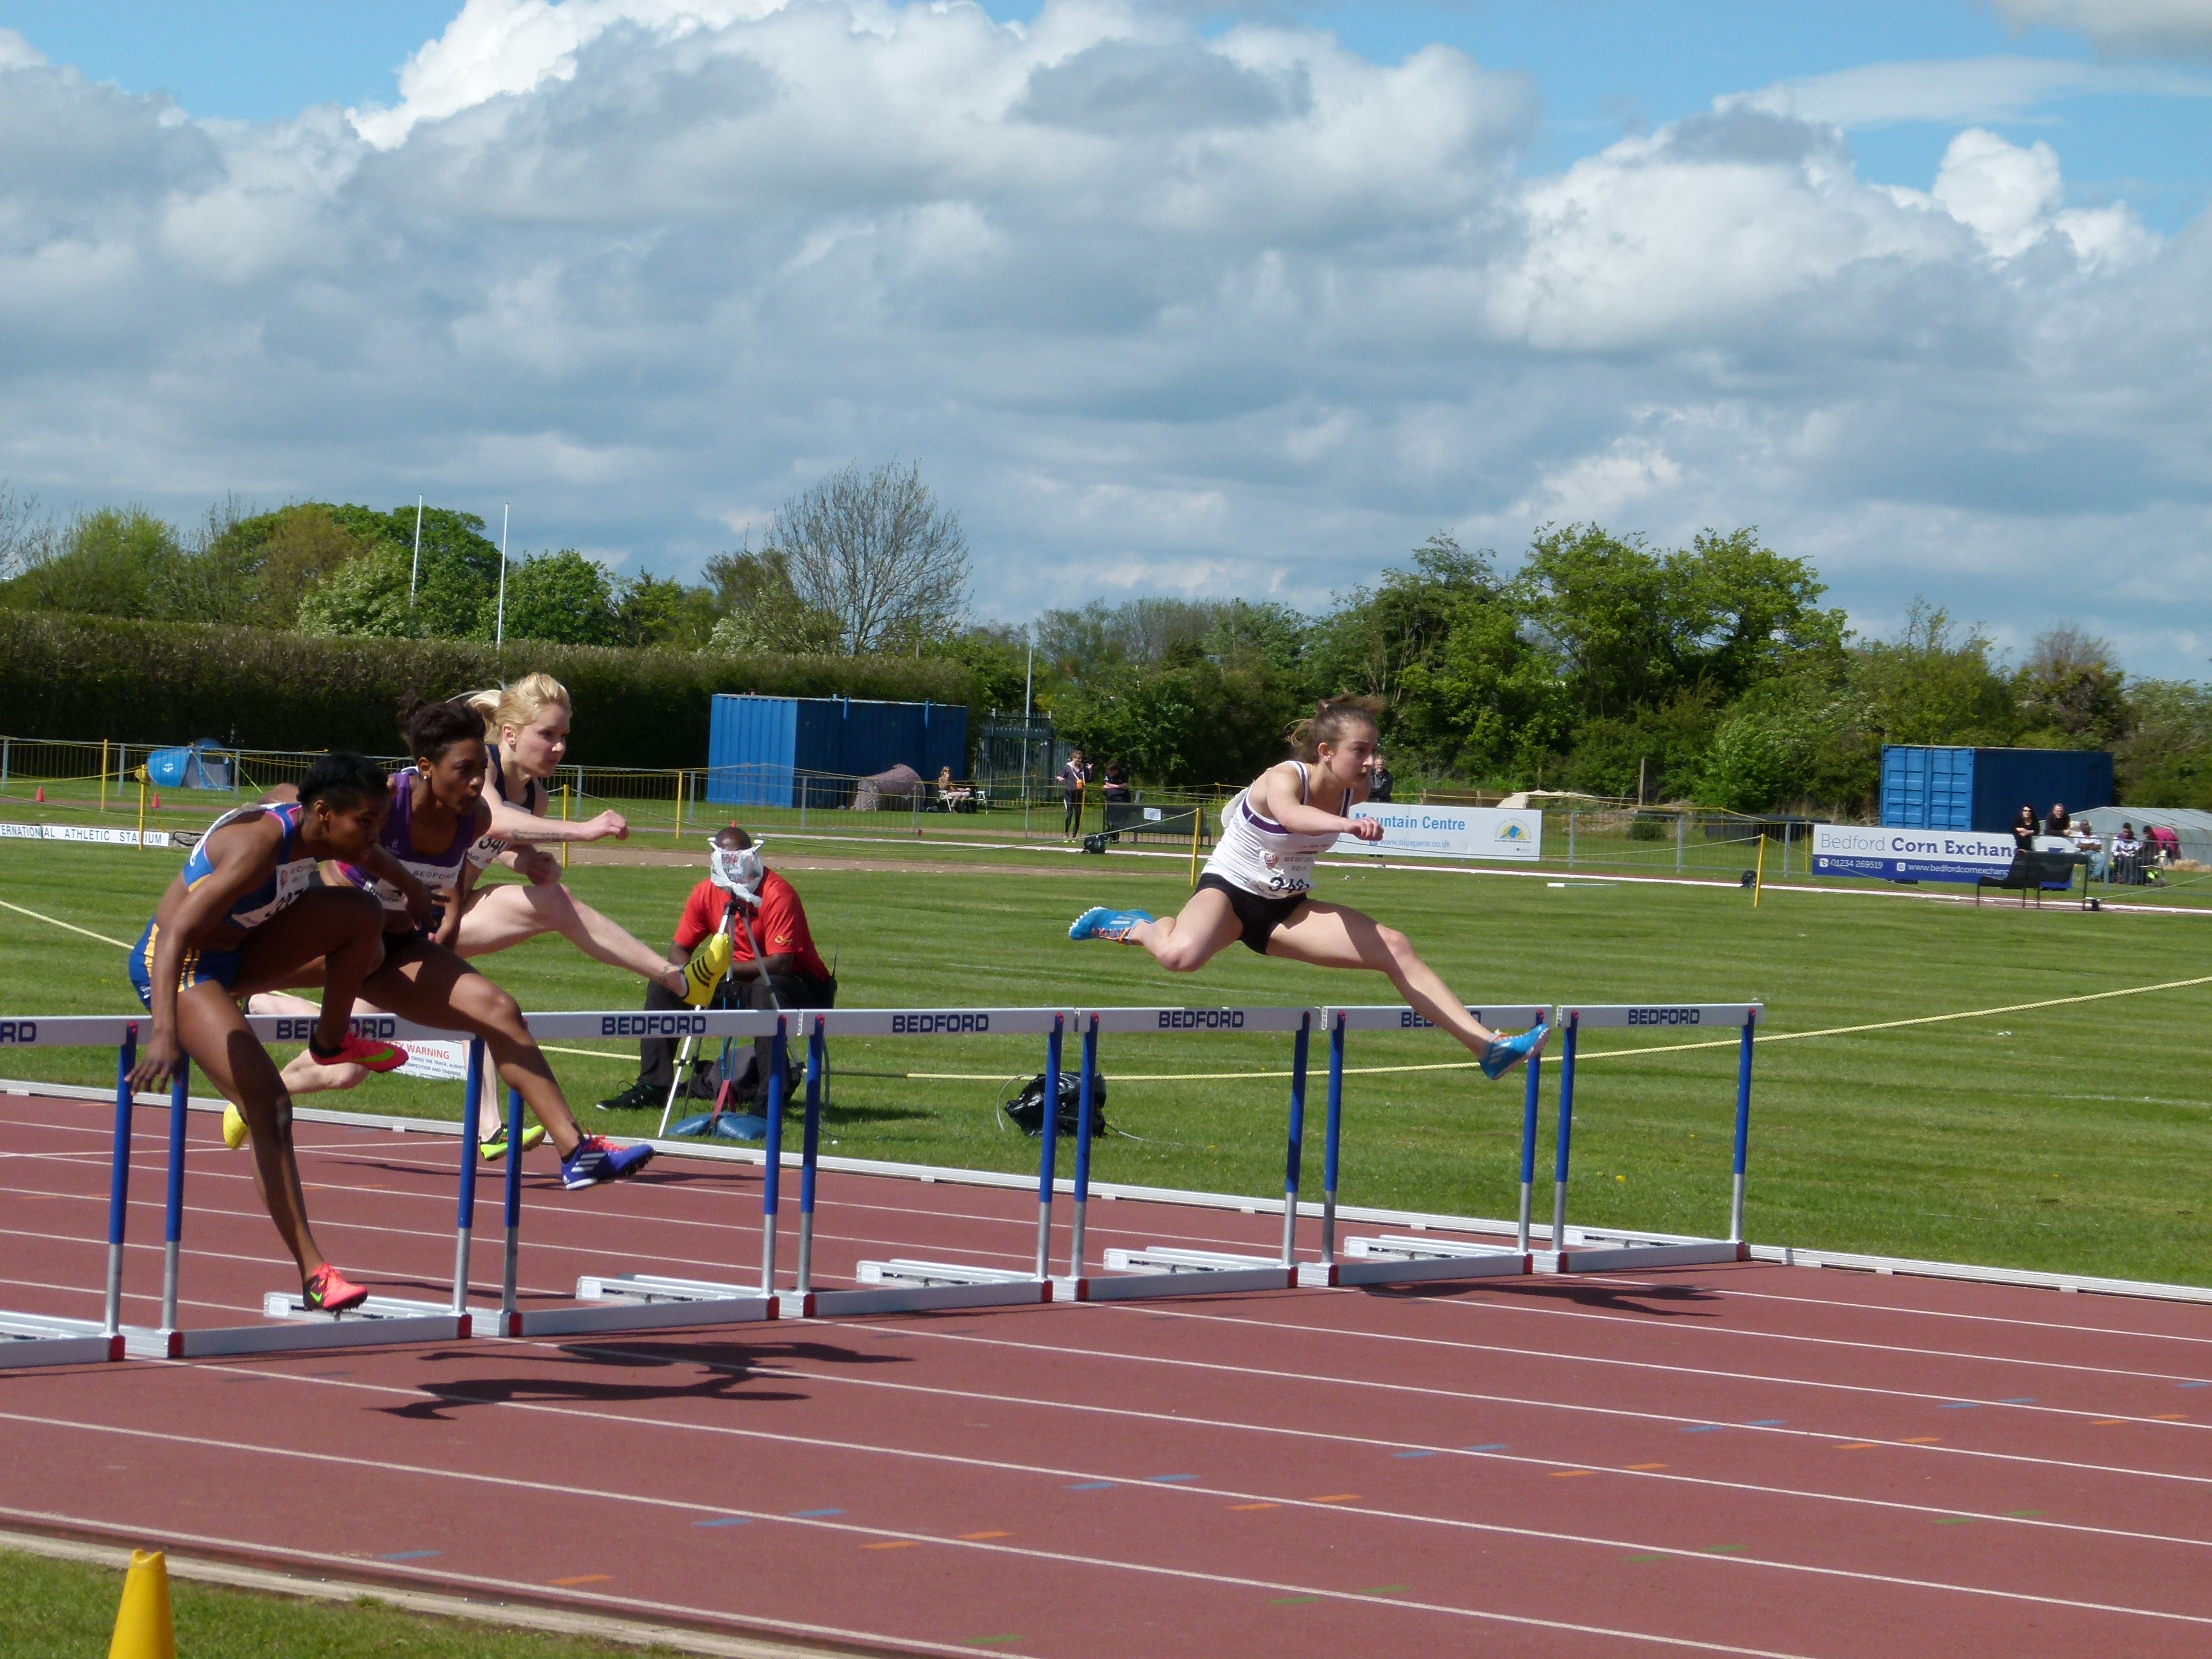 Athletes running a race over hurdles